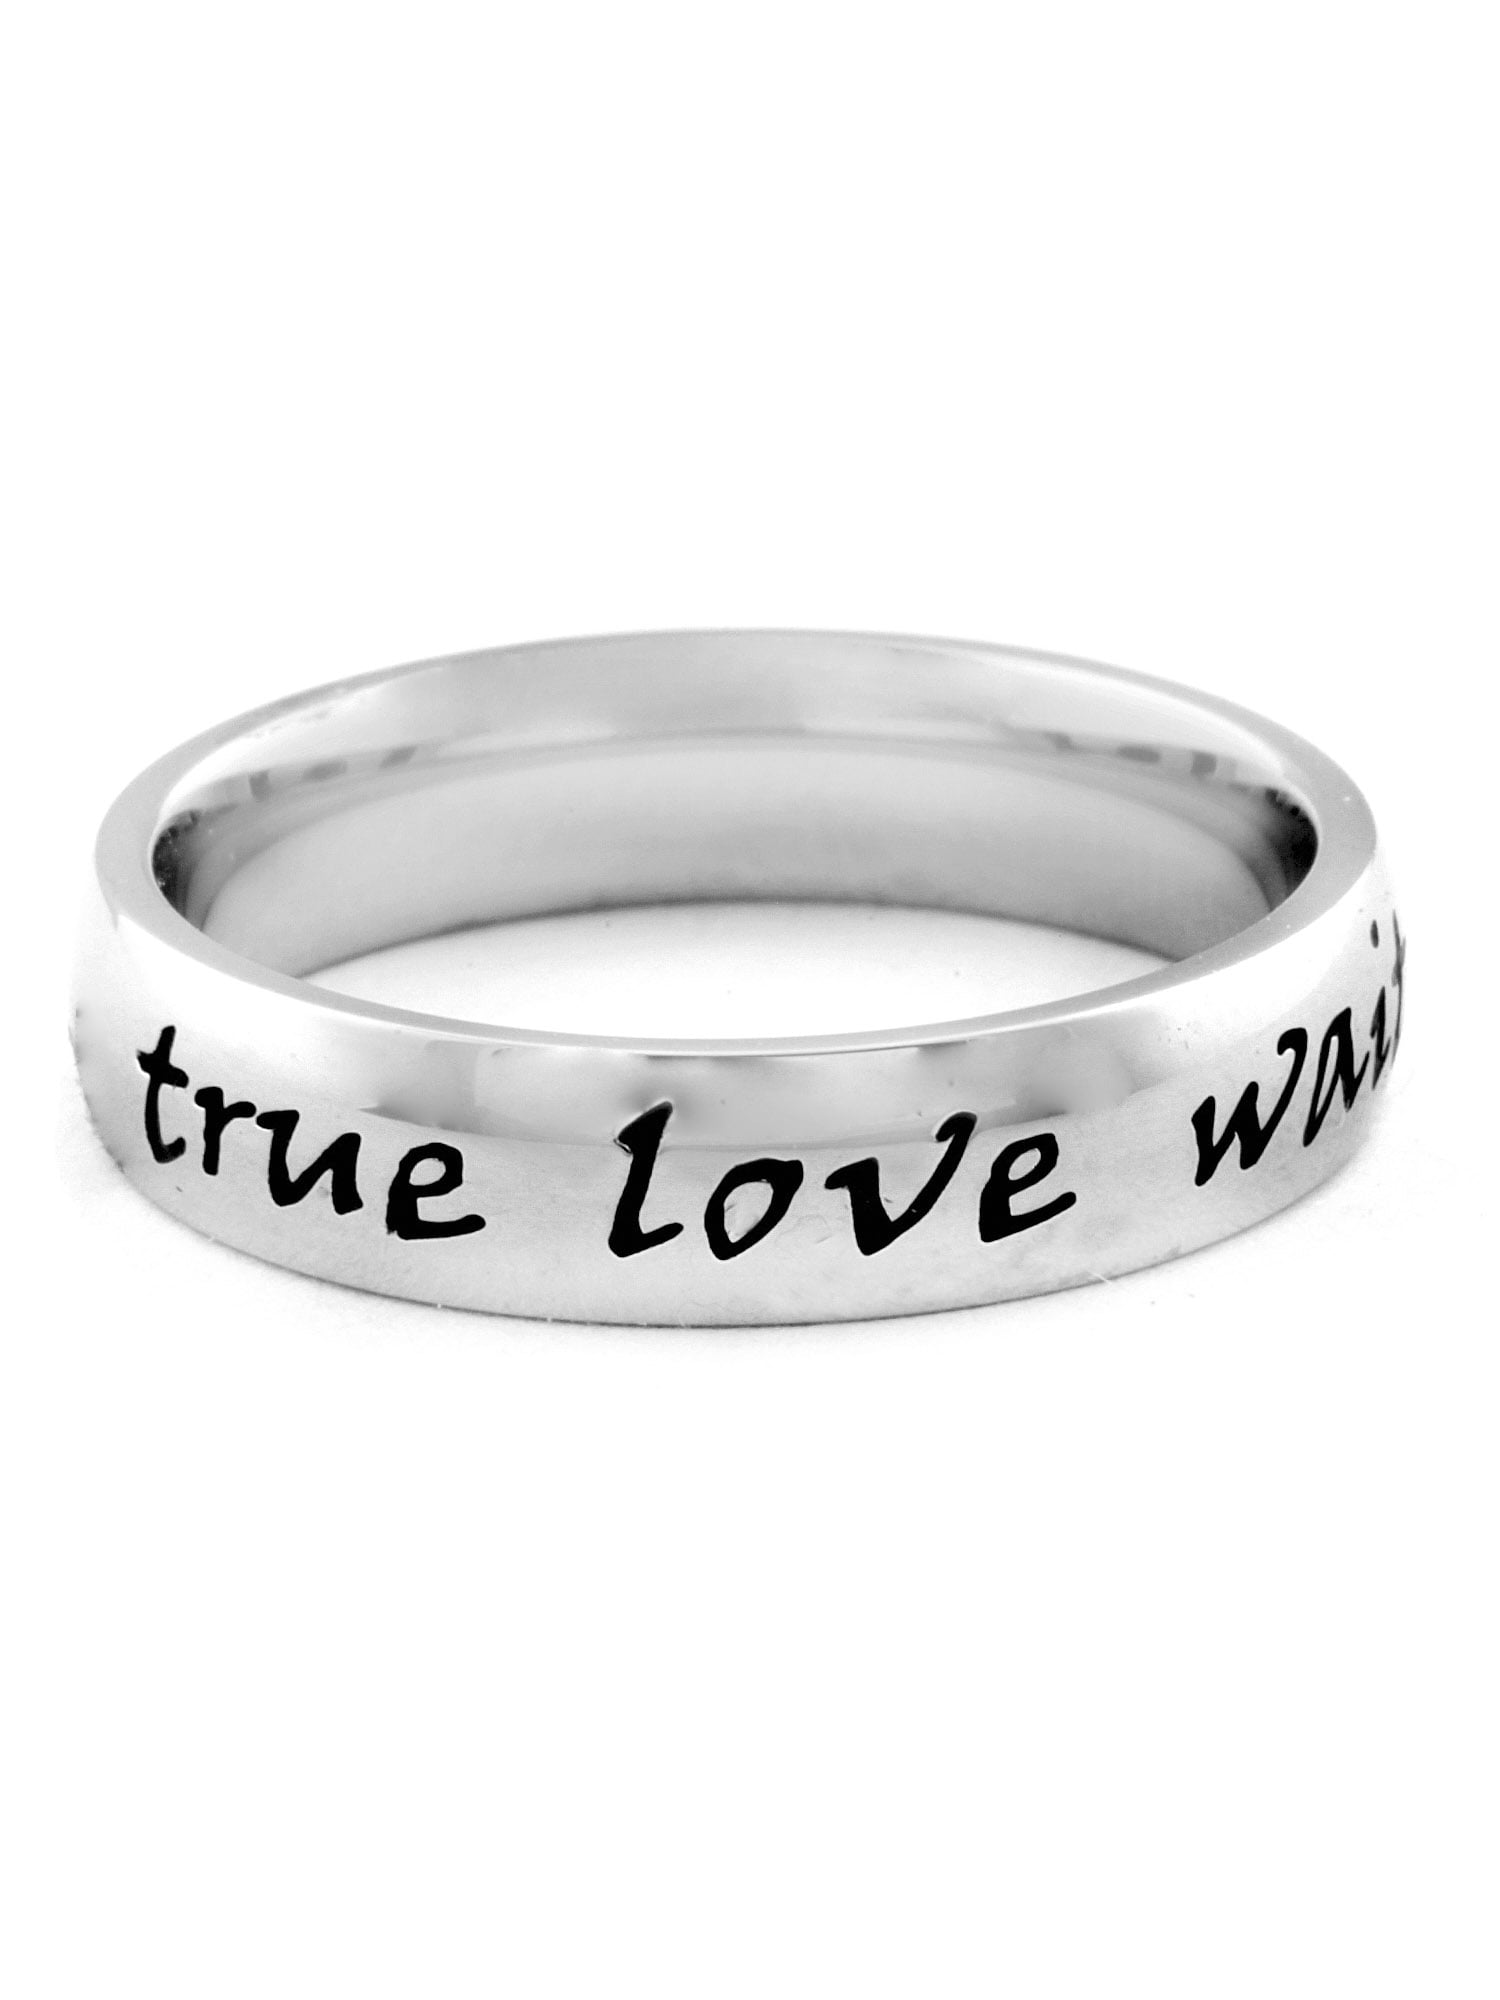 True Love Waits Ring, Sterling Silver Thin Band for Girls – North